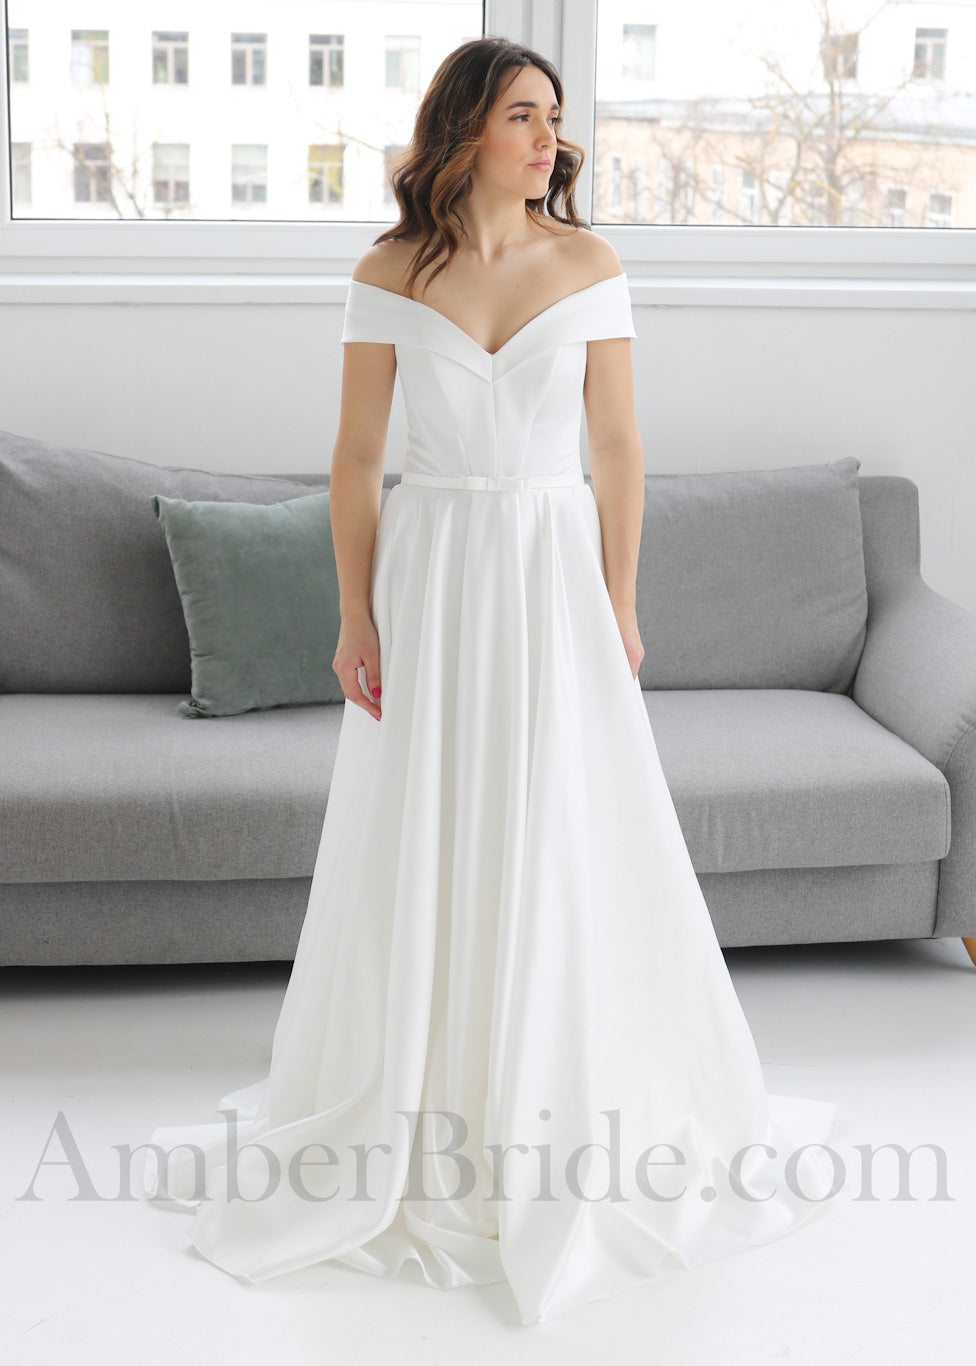 Minimalist A Line Wedding Dress with Satin and Off-Shoulder Sweetheart Neckline